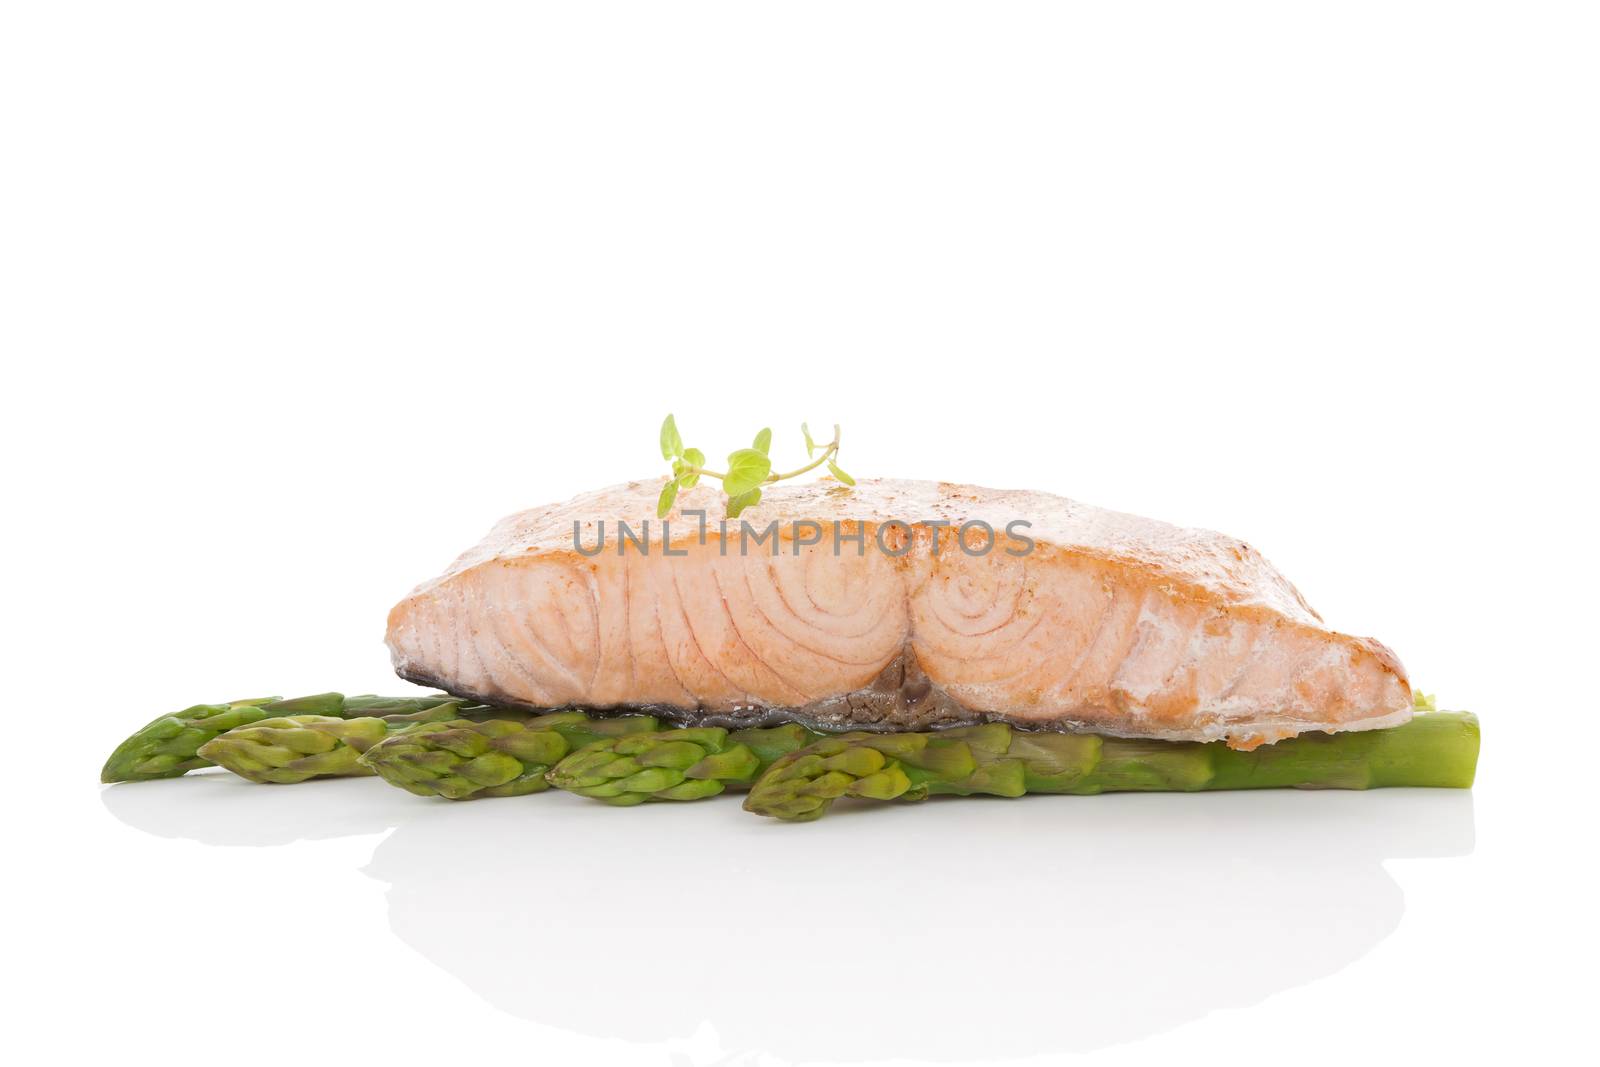 Delicious salmon steak on green asparagus isolated on white background. Culinary seafood eating.